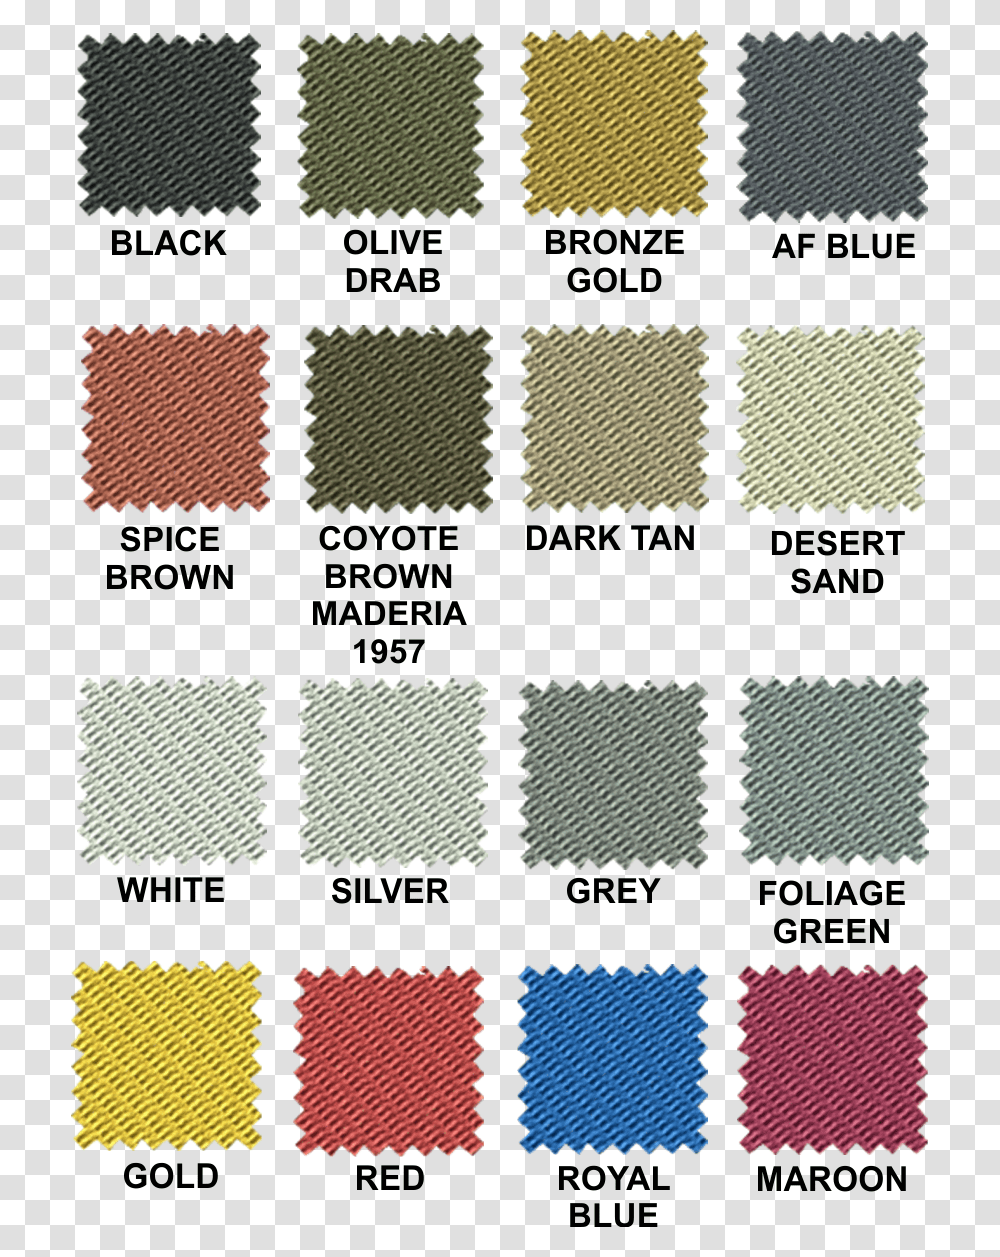 Thread Swatch Solid Air Force Ocp Patch Colors, Label, Plot, Diagram Transparent Png